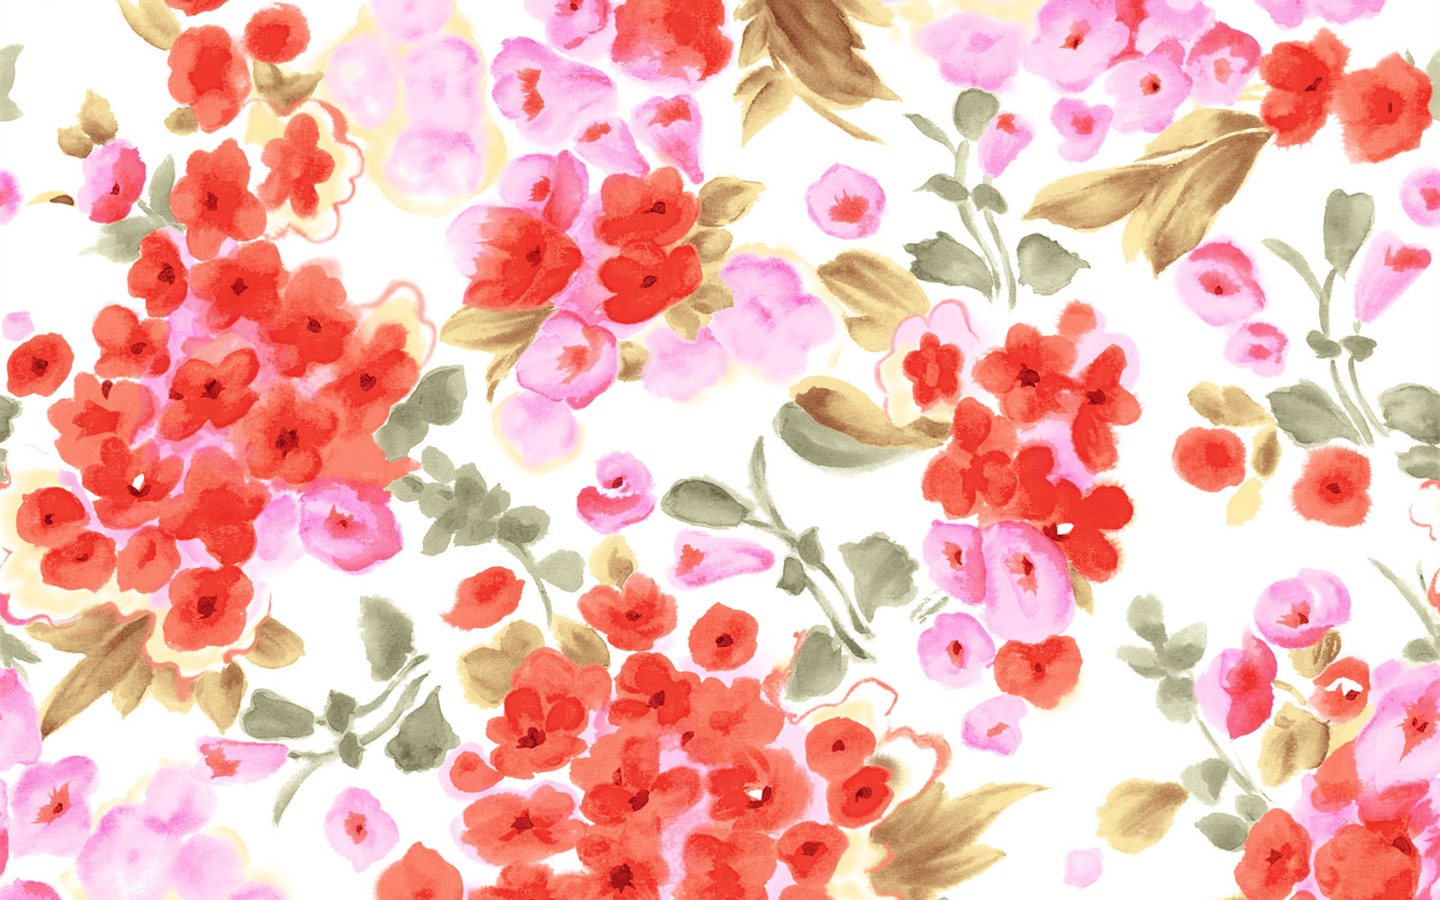 Synthetic Flower Wallpapers (2) #6 - 1440x900